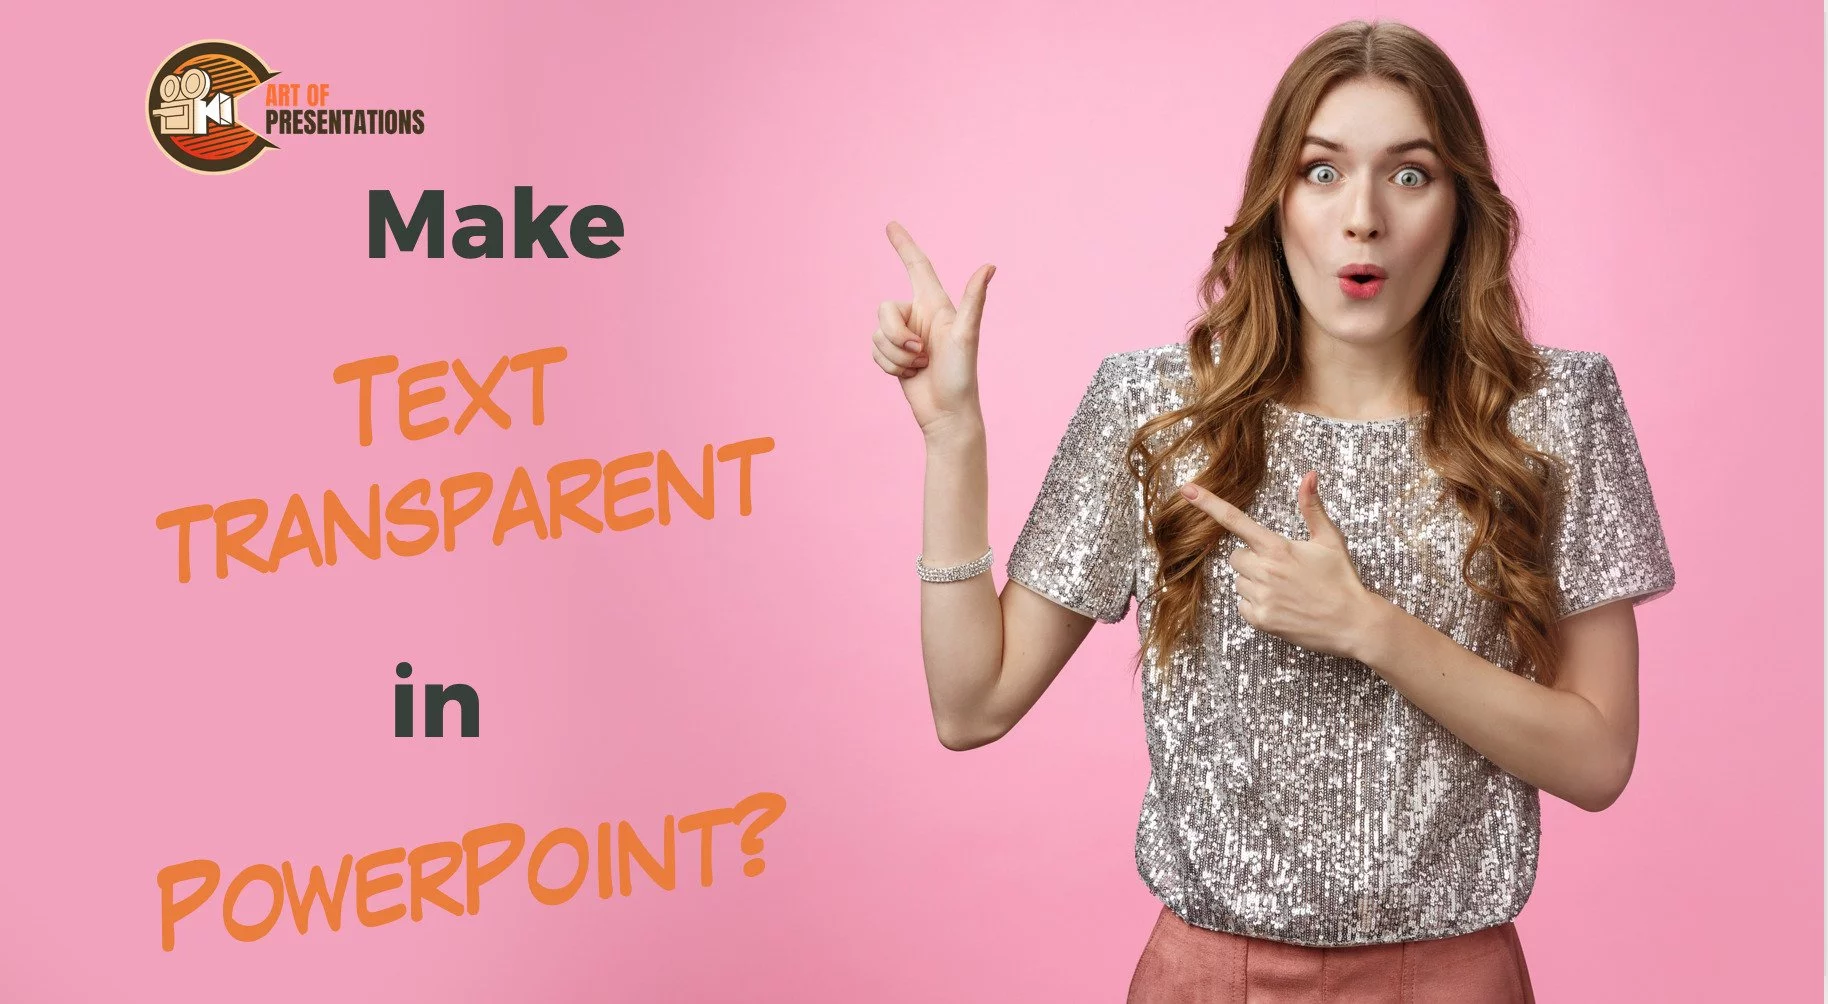 Make Text Transparent in PowerPoint [EASY Guide]